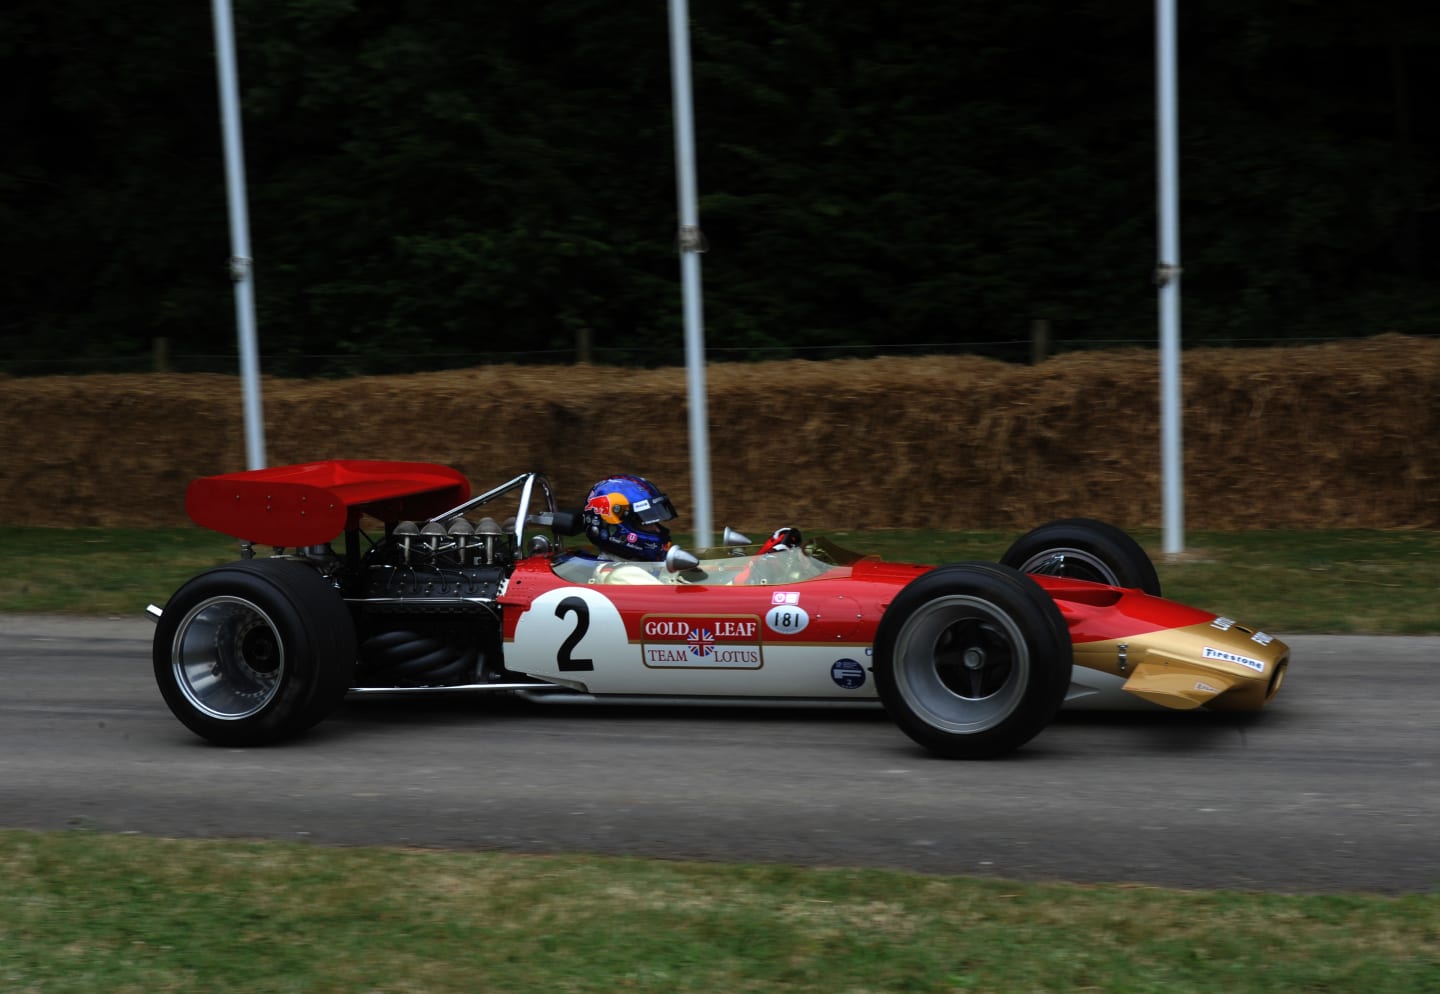 www.sutton-images.com Adrian Newey (GBR) Lotus 49 at Goodwood Festival of Speed, Goodwood, England, 30 June - 2 July 2017. © Sutton Images